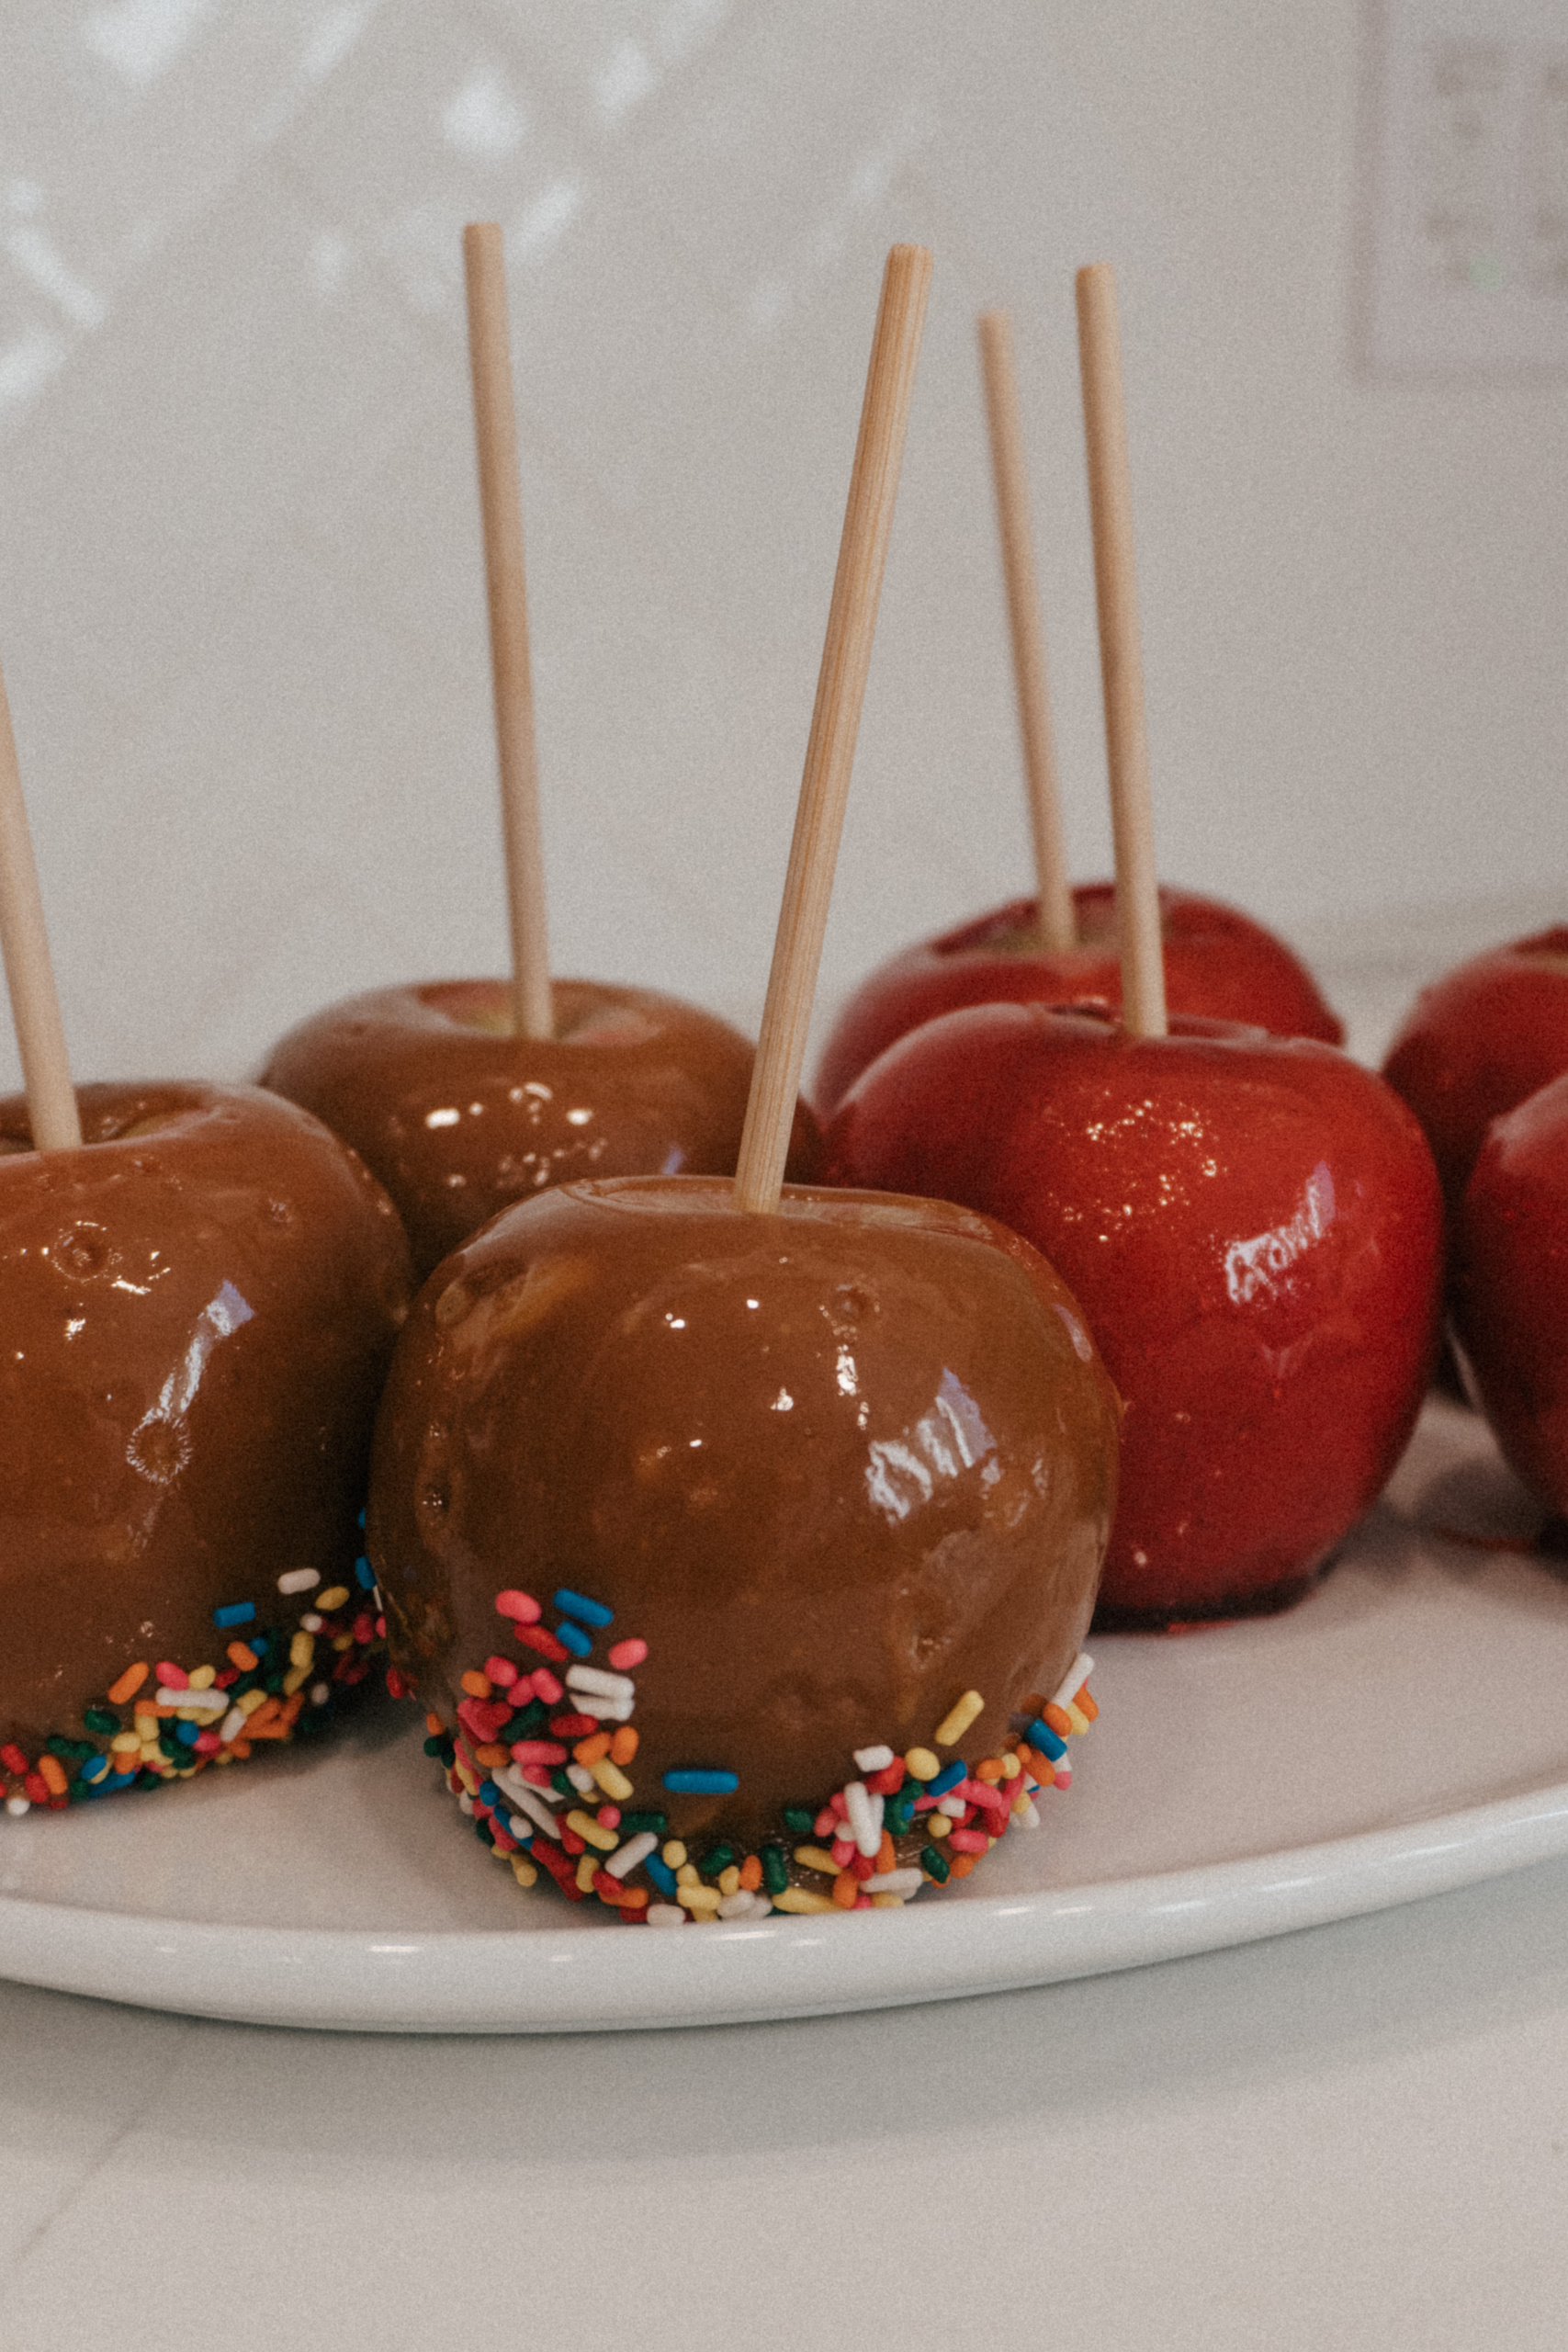 How To Throw A Spooky Last-Minute Halloween Party | Amazon Halloween Party Finds | Halloween Decor for a Last-Minute Party | Halloween Treats for a Last-Minute Halloween Party | Everything You Need to Throw A Halloween Party | Spooky Halloween Decorations | Candy Apples and Caramel Apples